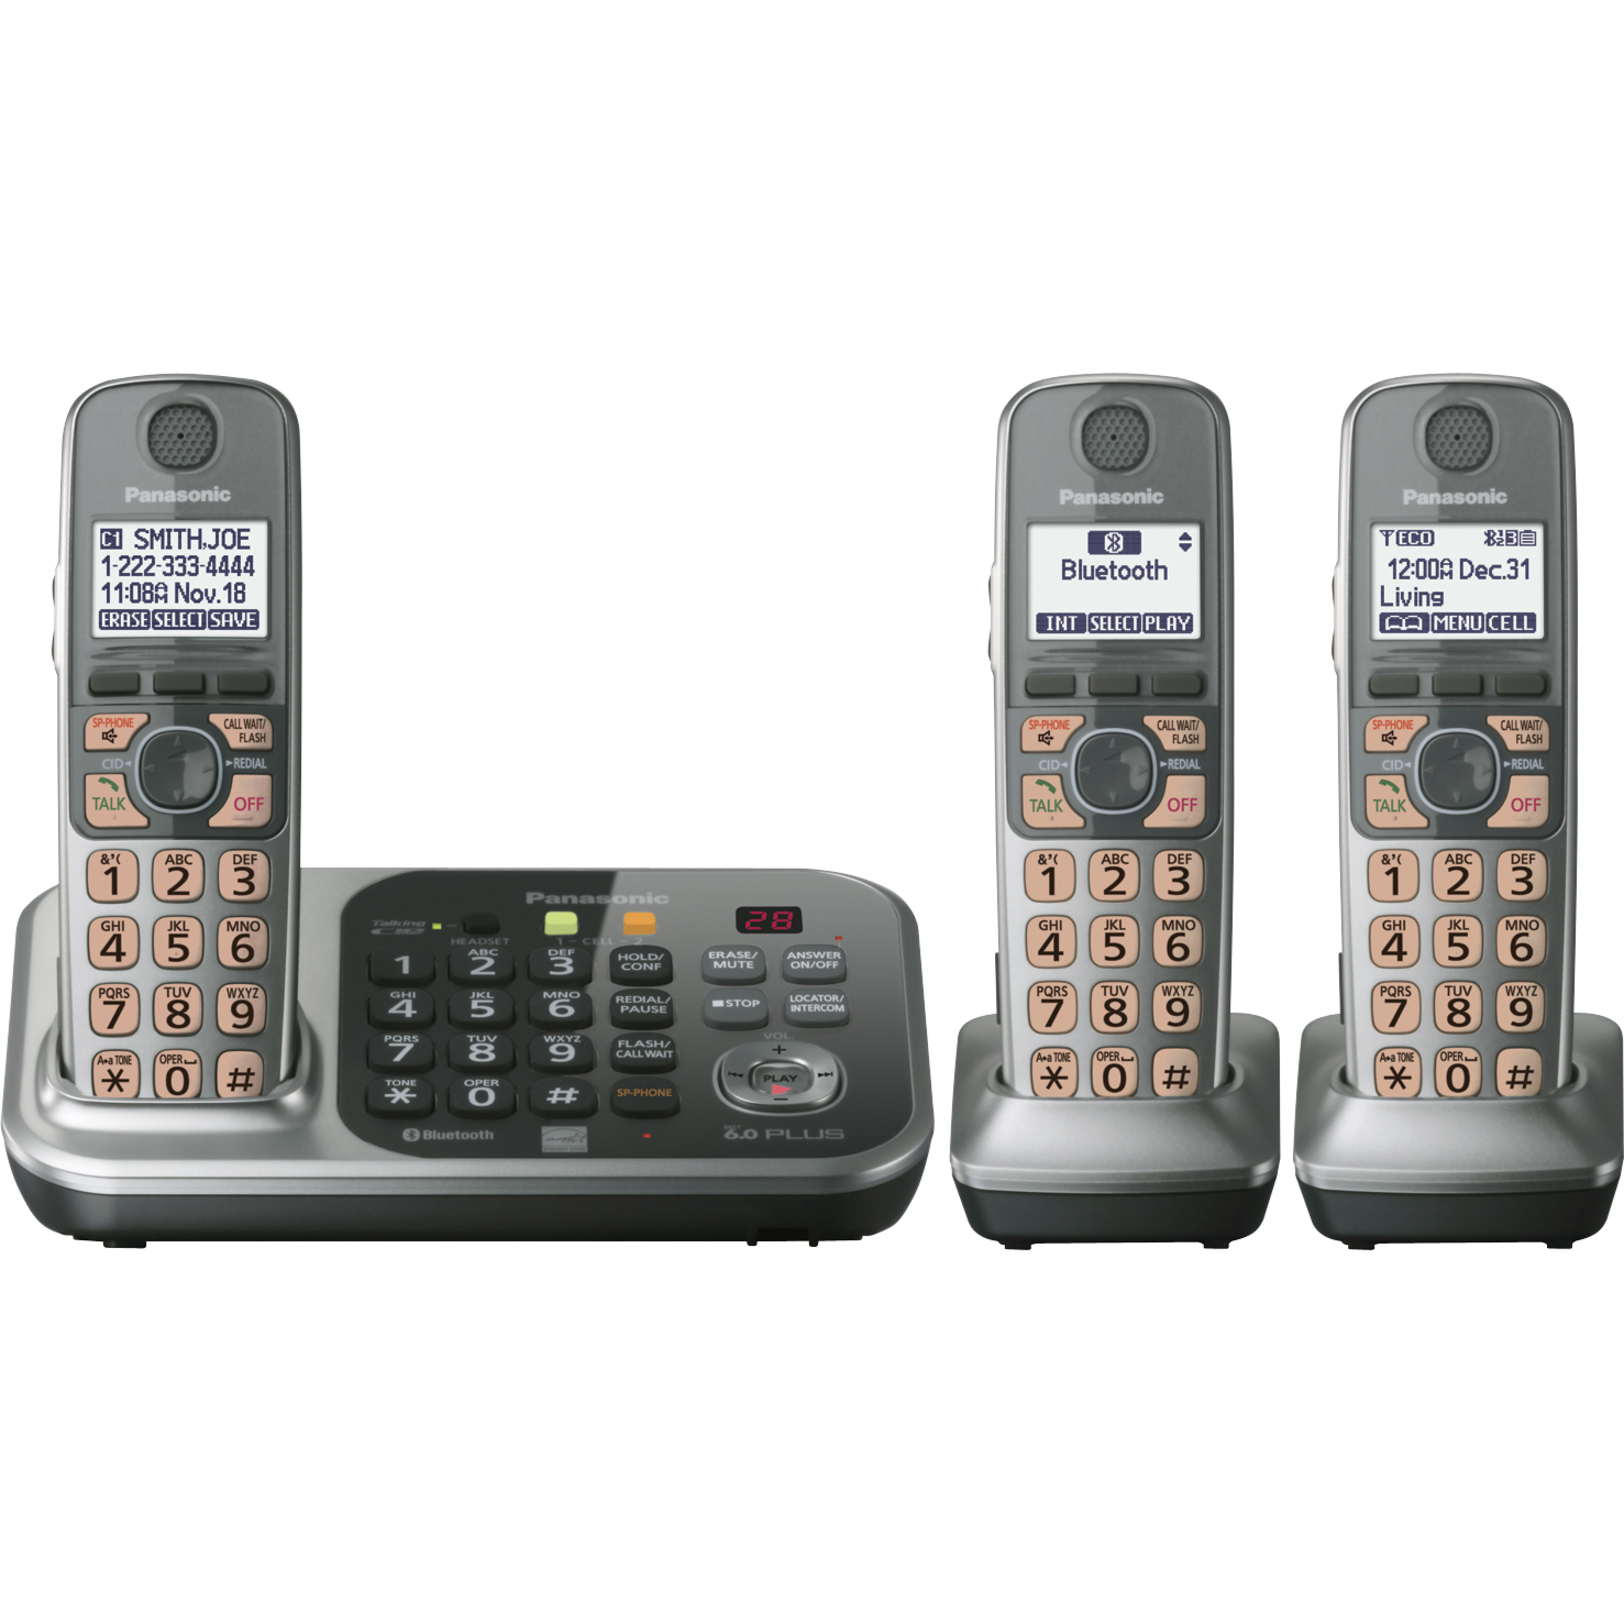 Panasonic KX-TG7743S DECT 6.0 1.90 GHz Cordless Phone, Silver - image 1 of 2